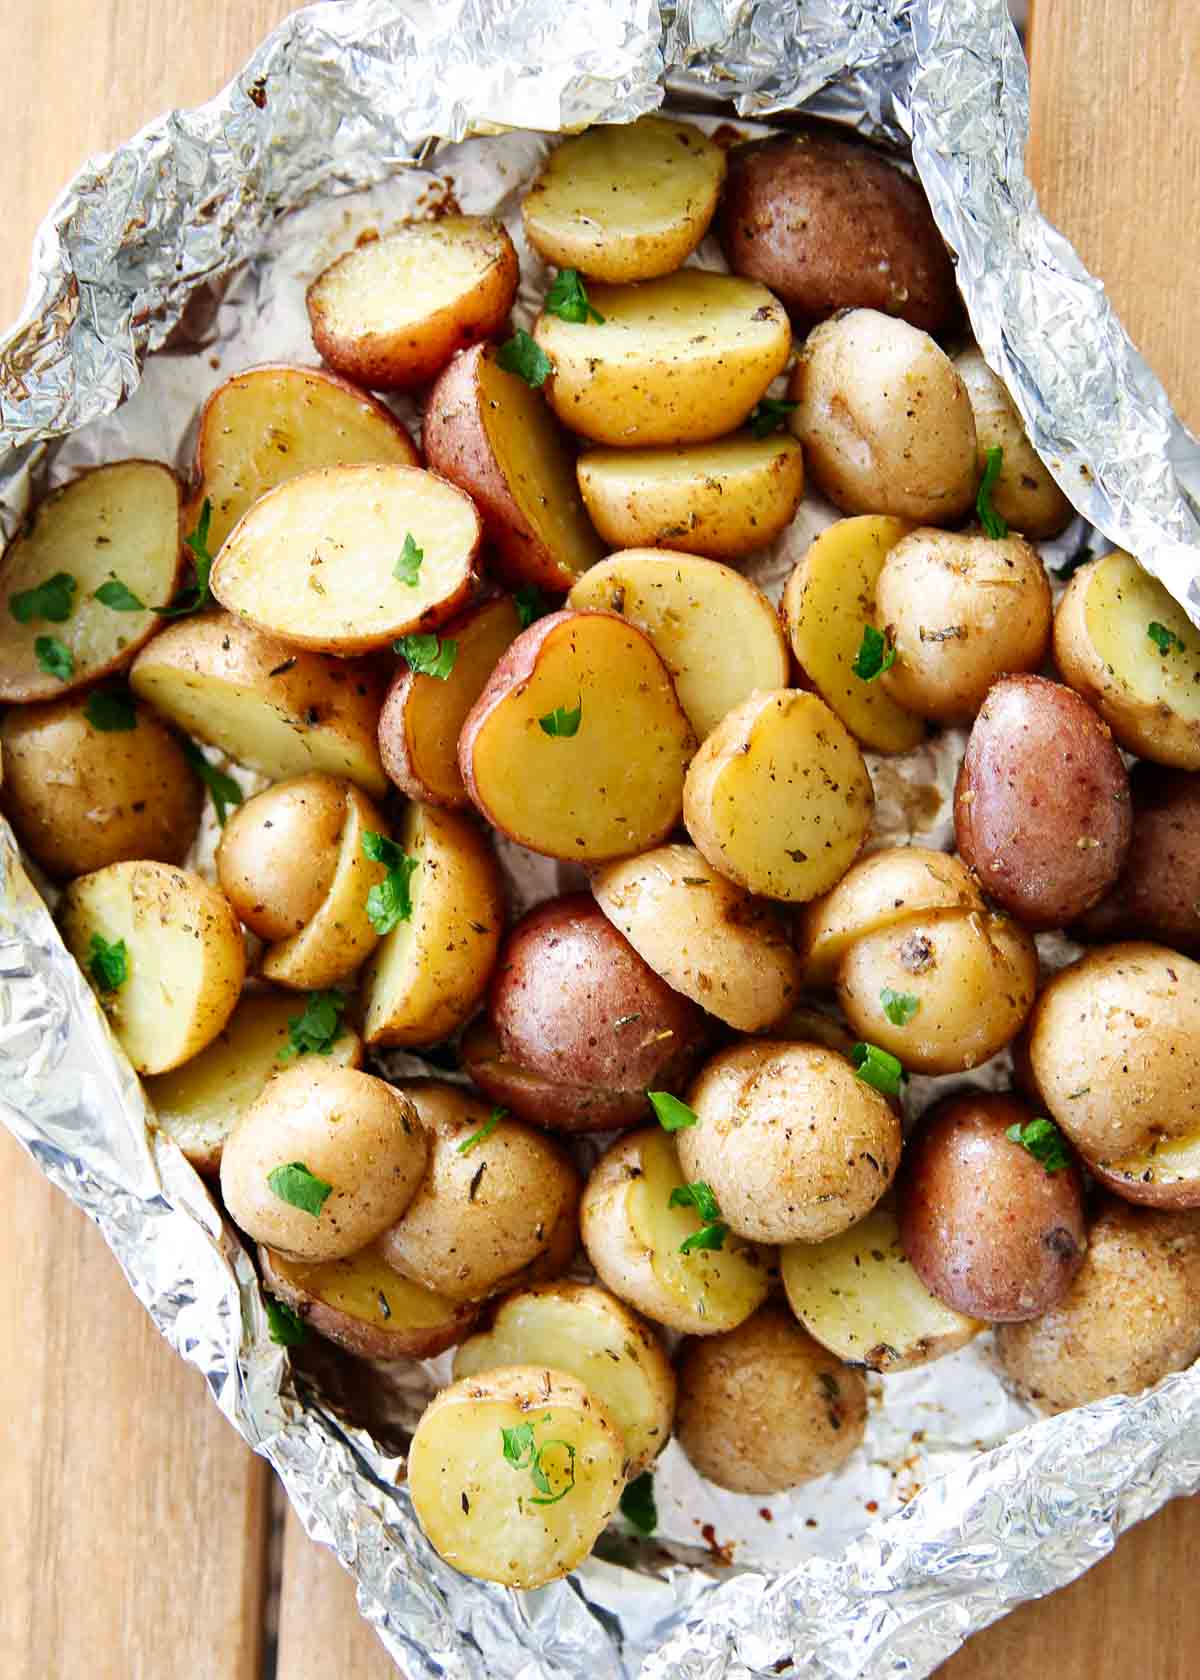 Grilled potatoes in foil.